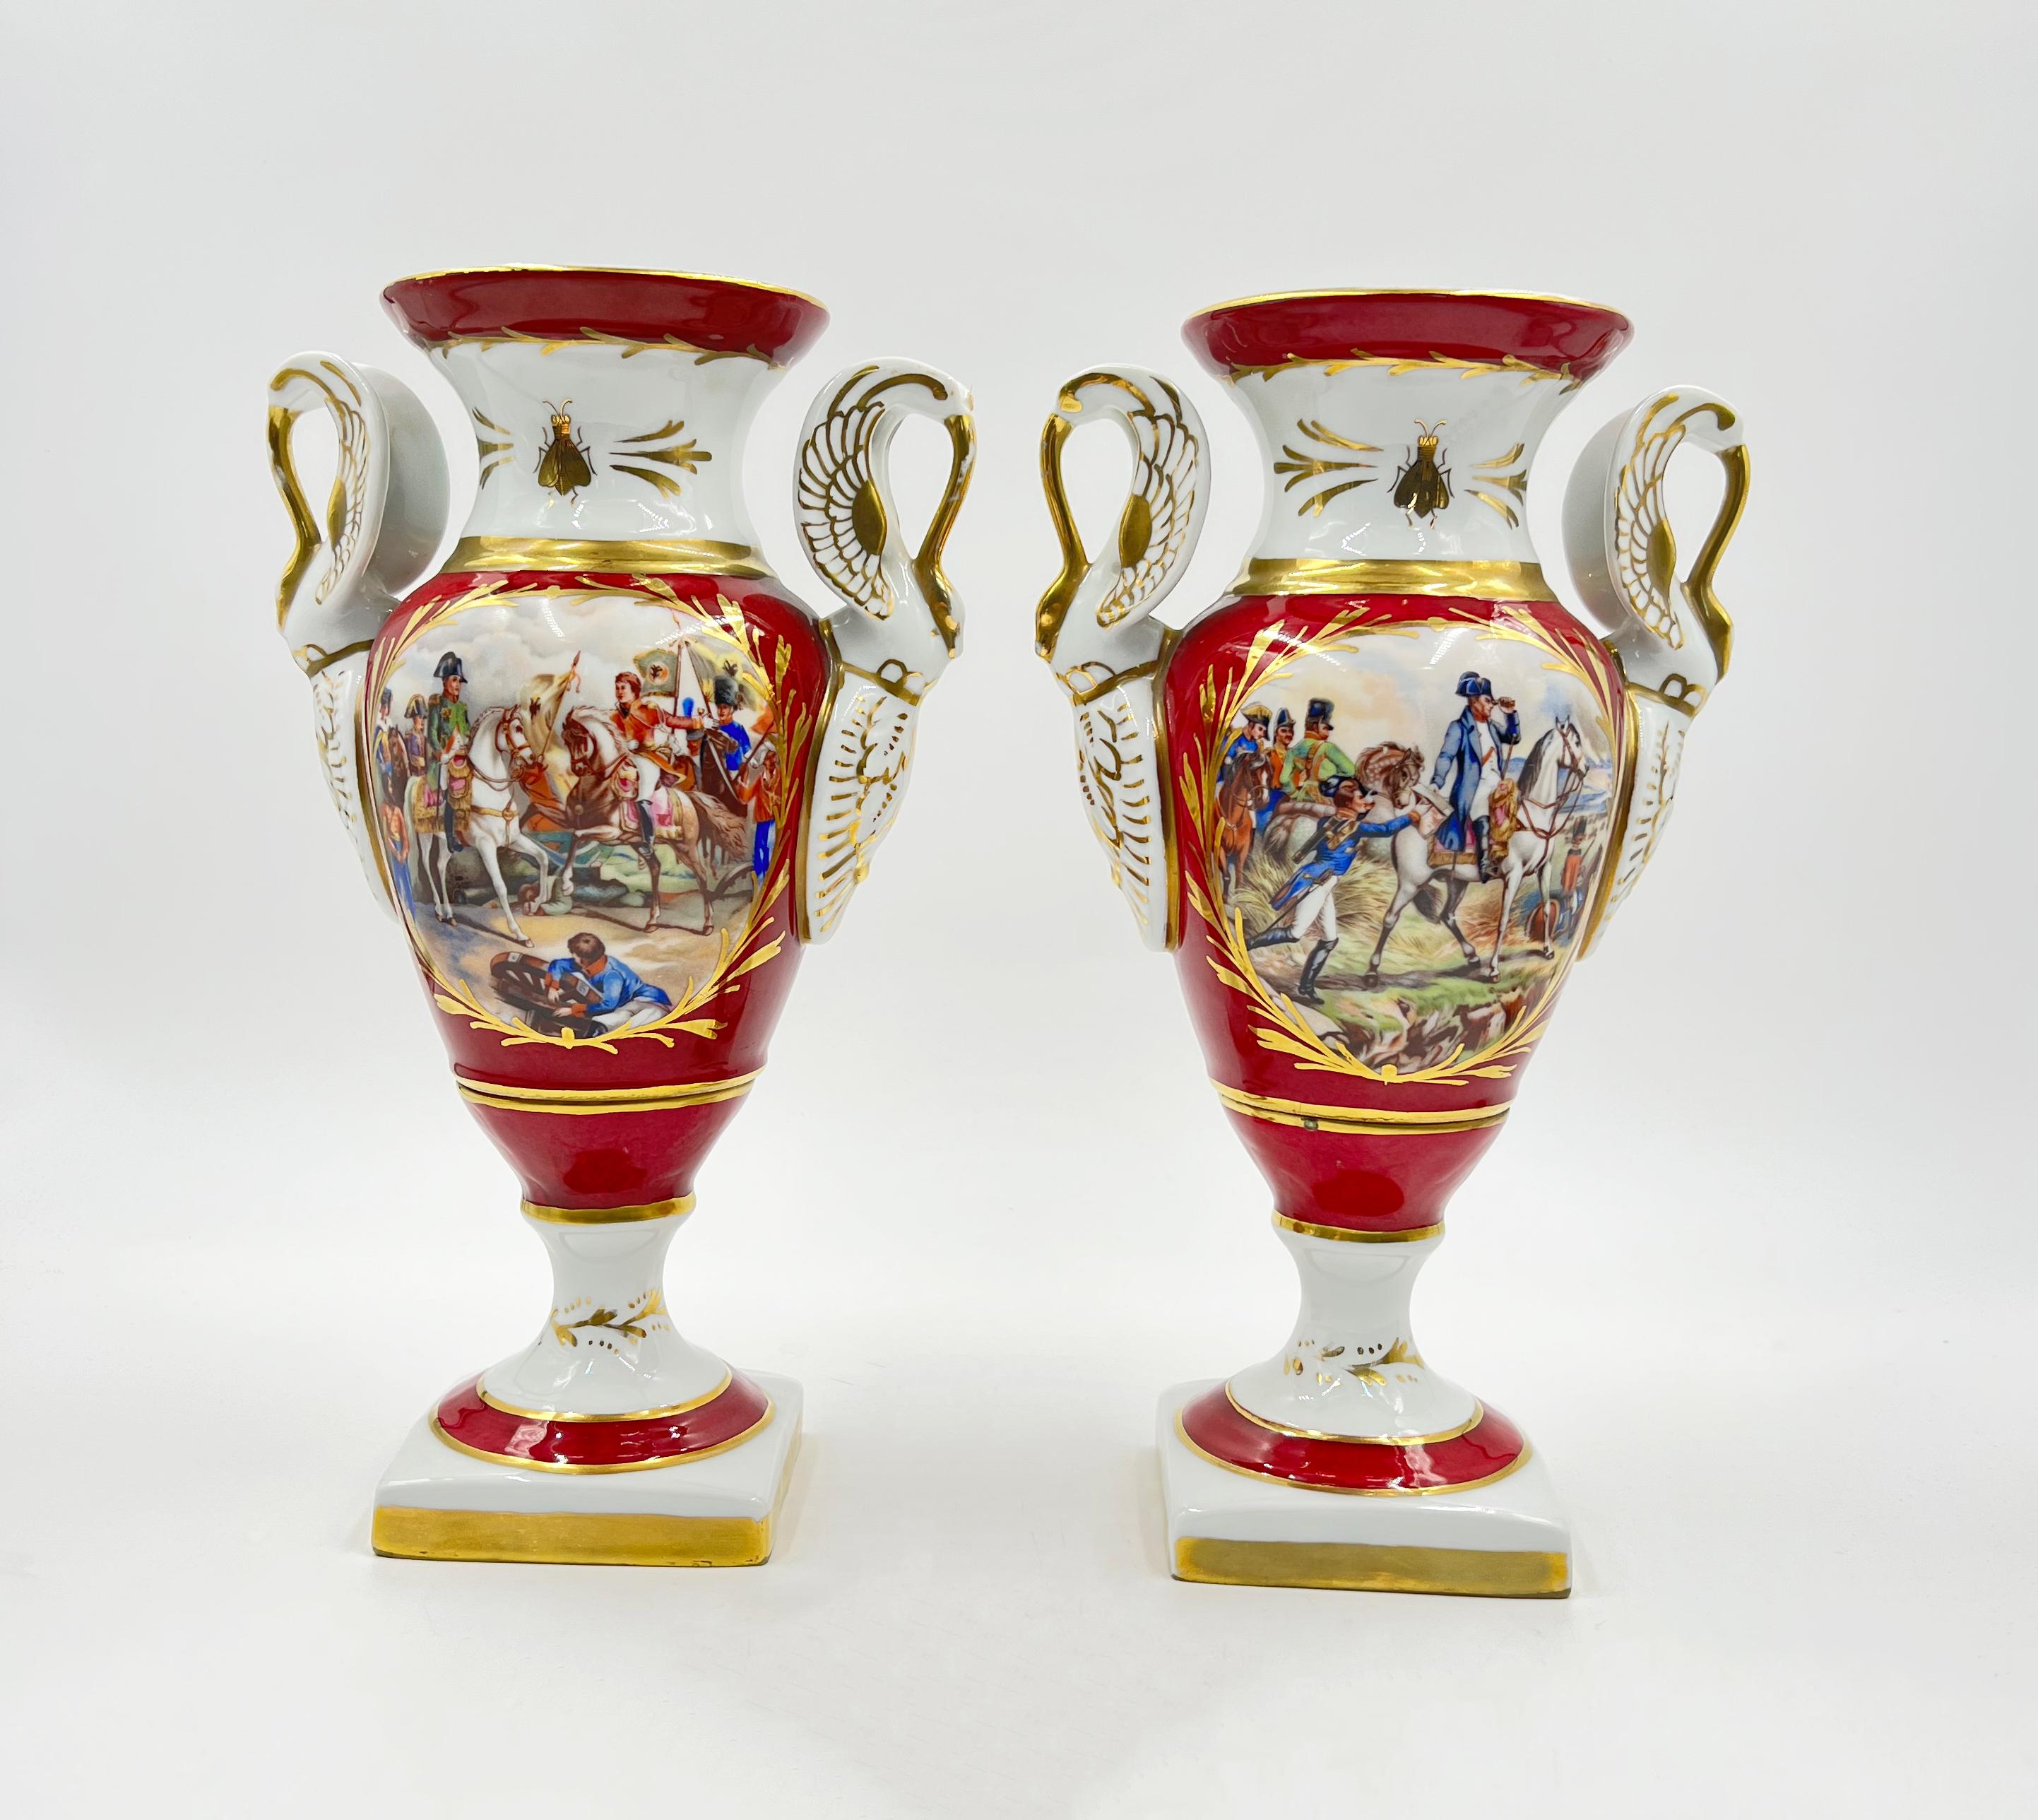 Pair of antique French porcelain vases, the front of the vases hand painted with battle scenes, while the reverse decorated with golden eagles, the sides decorated with swan-shaped handles and raised on a square base.
   